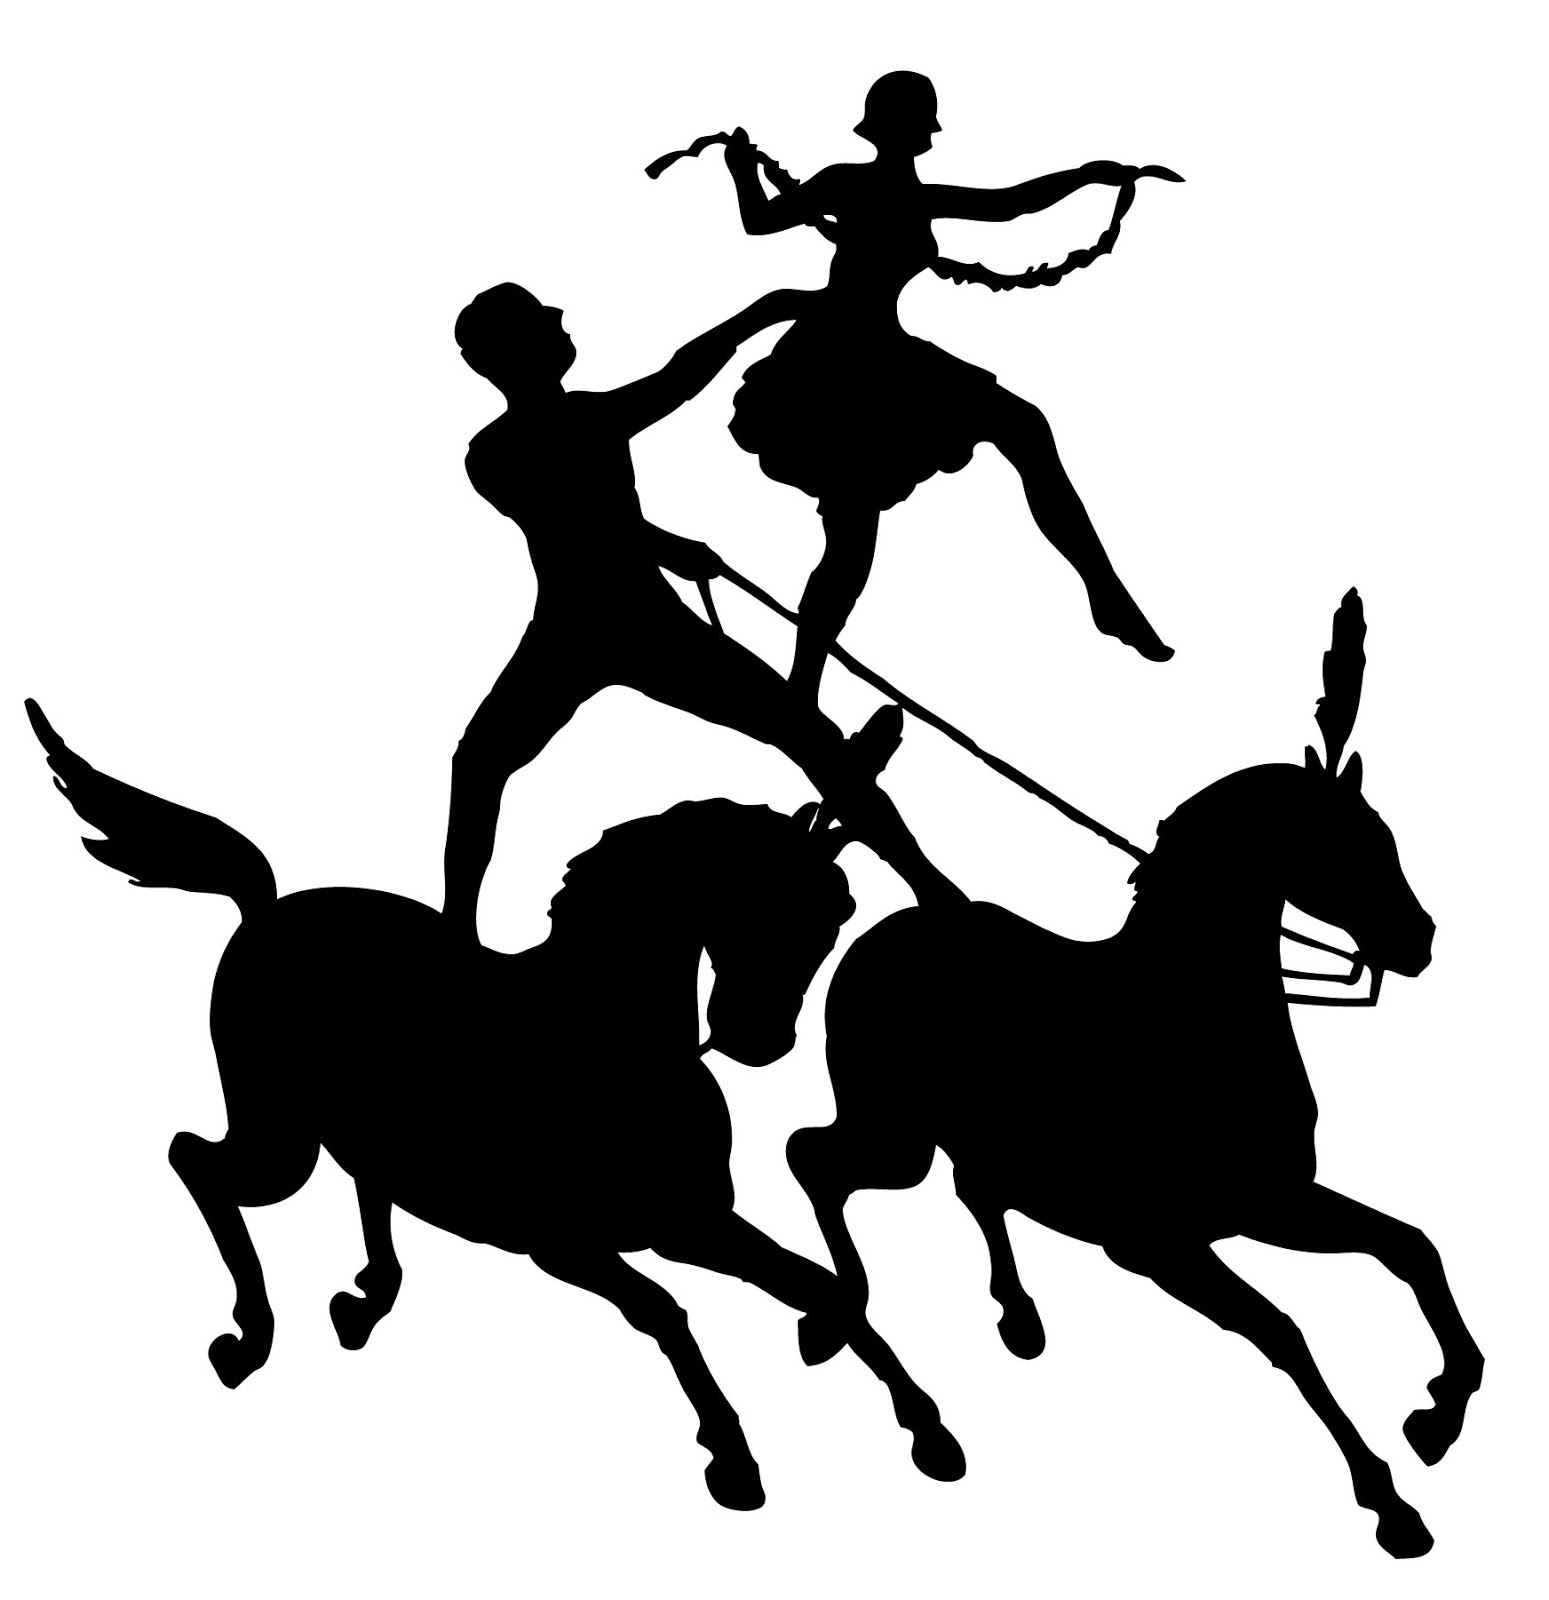 Circus Horses Silhouette Image - Lady & Man Performers - The ...